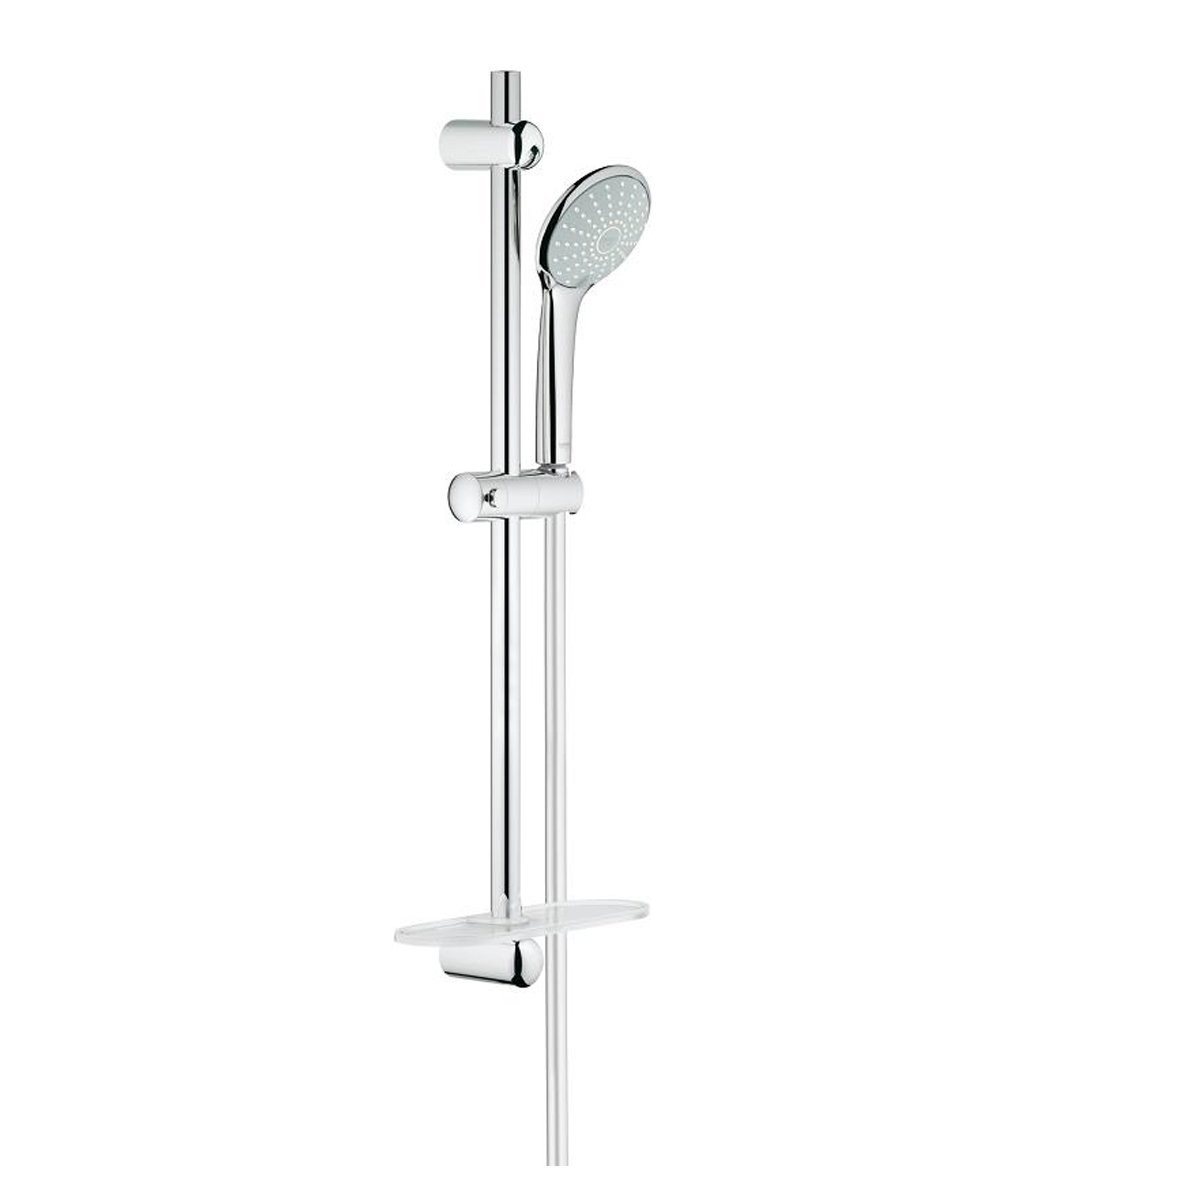 Grohe shower rail model Duo Euphoria with 3-jet hand shower and SprayDimmer  system